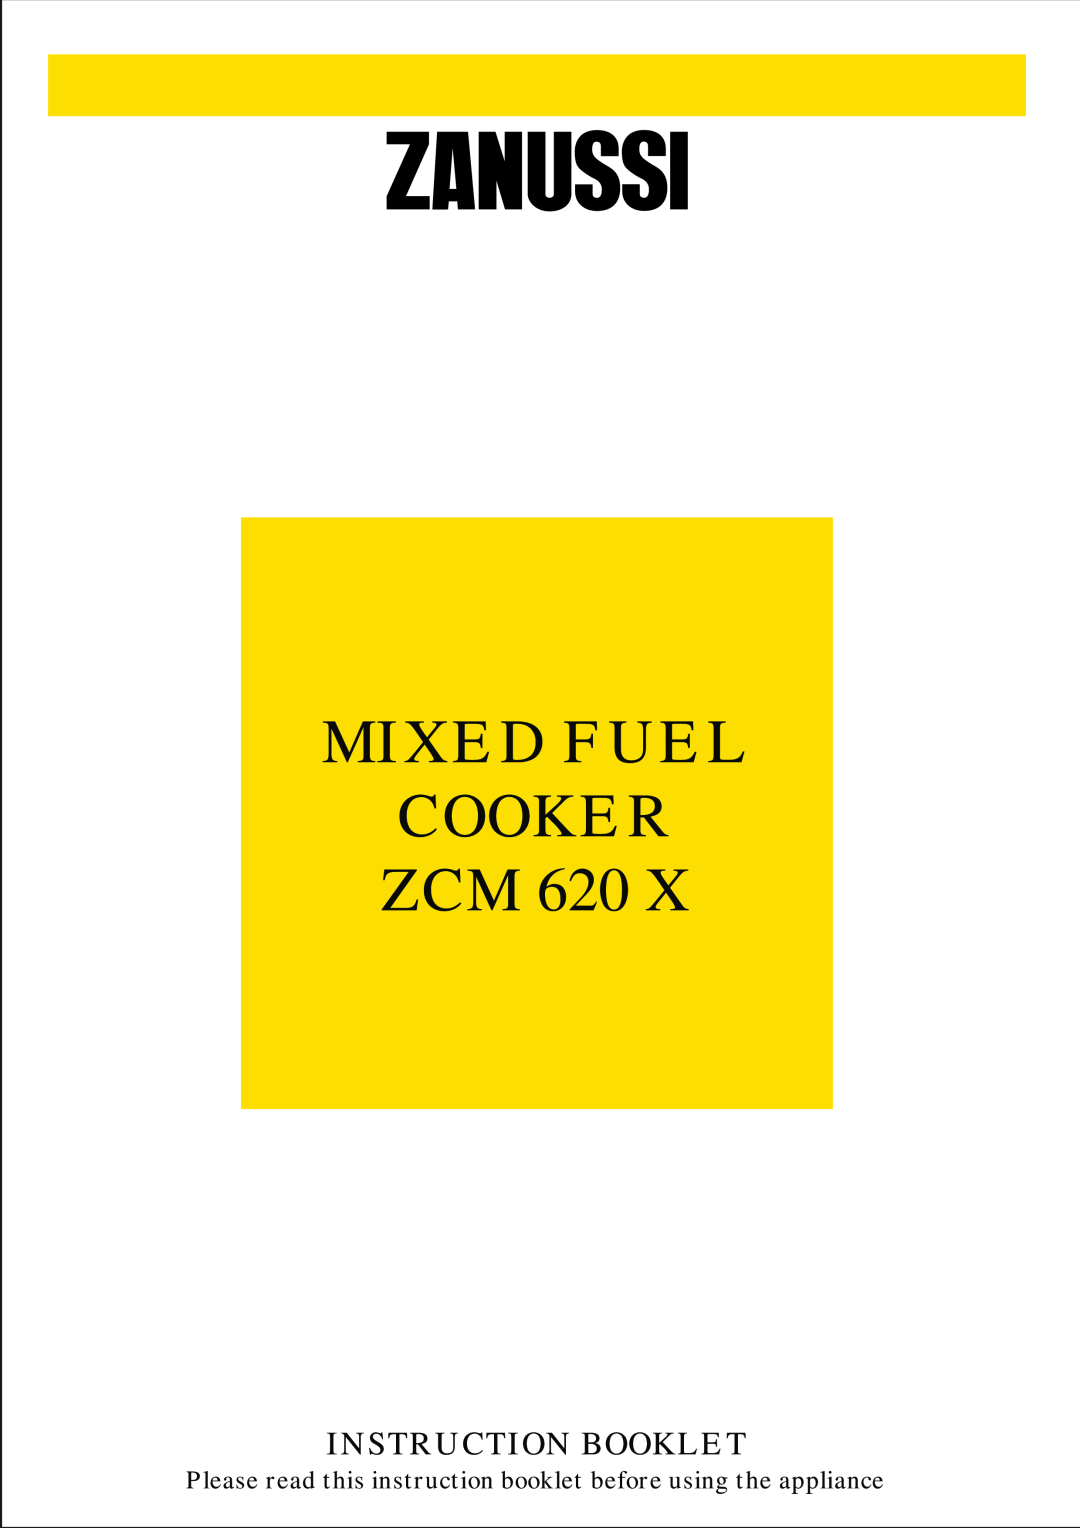 Zanussi ZCM 620 X manual Mixed Fuel Cooker Zcm, Instruction Booklet 